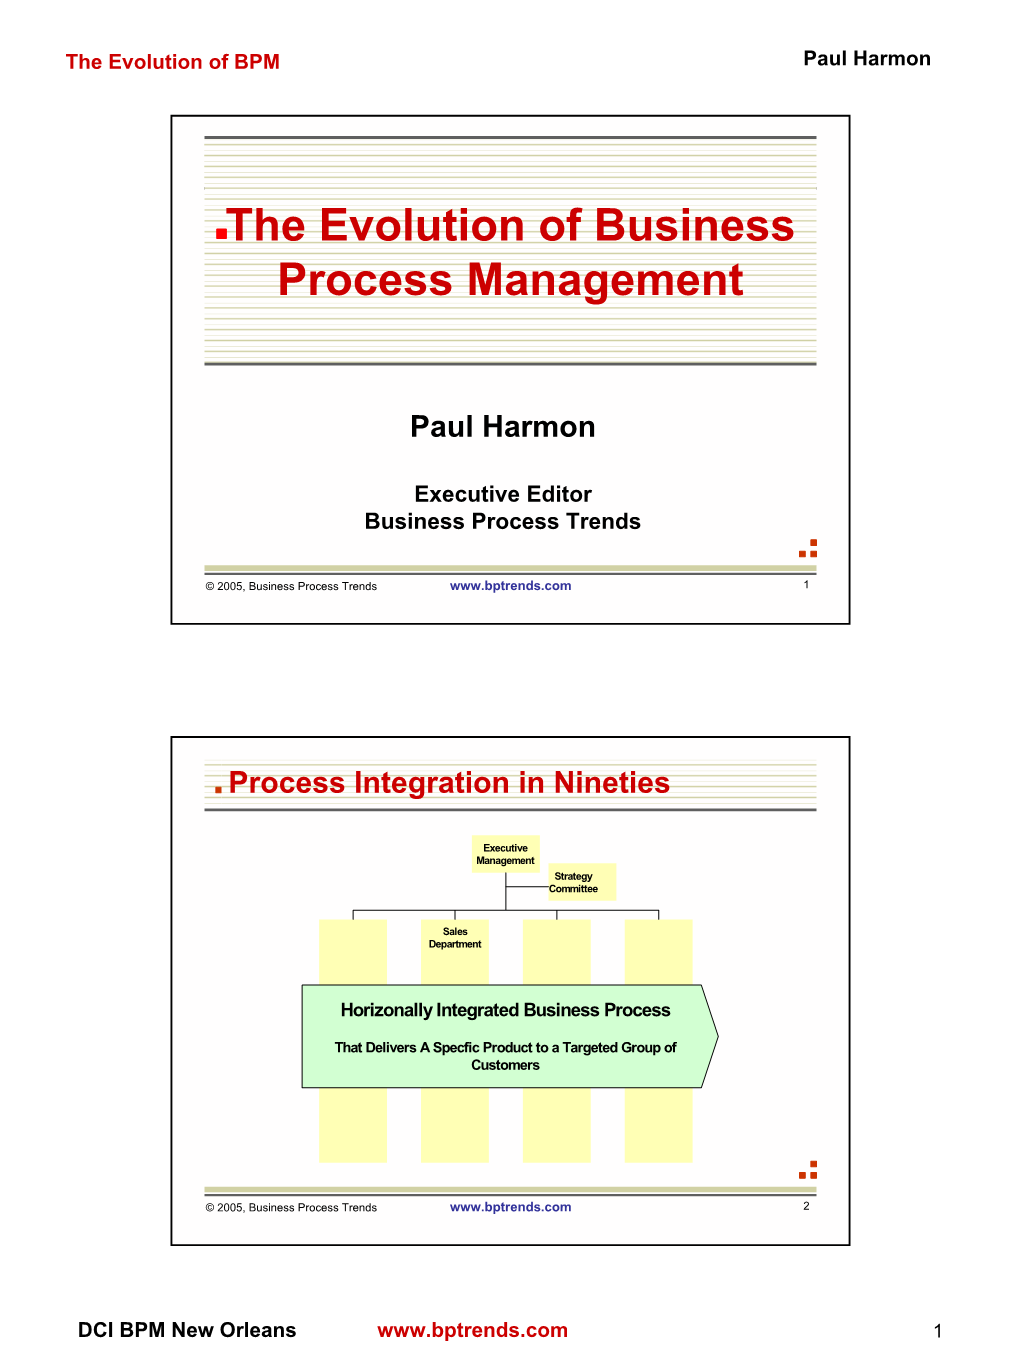 The Evolution of Business Process Management